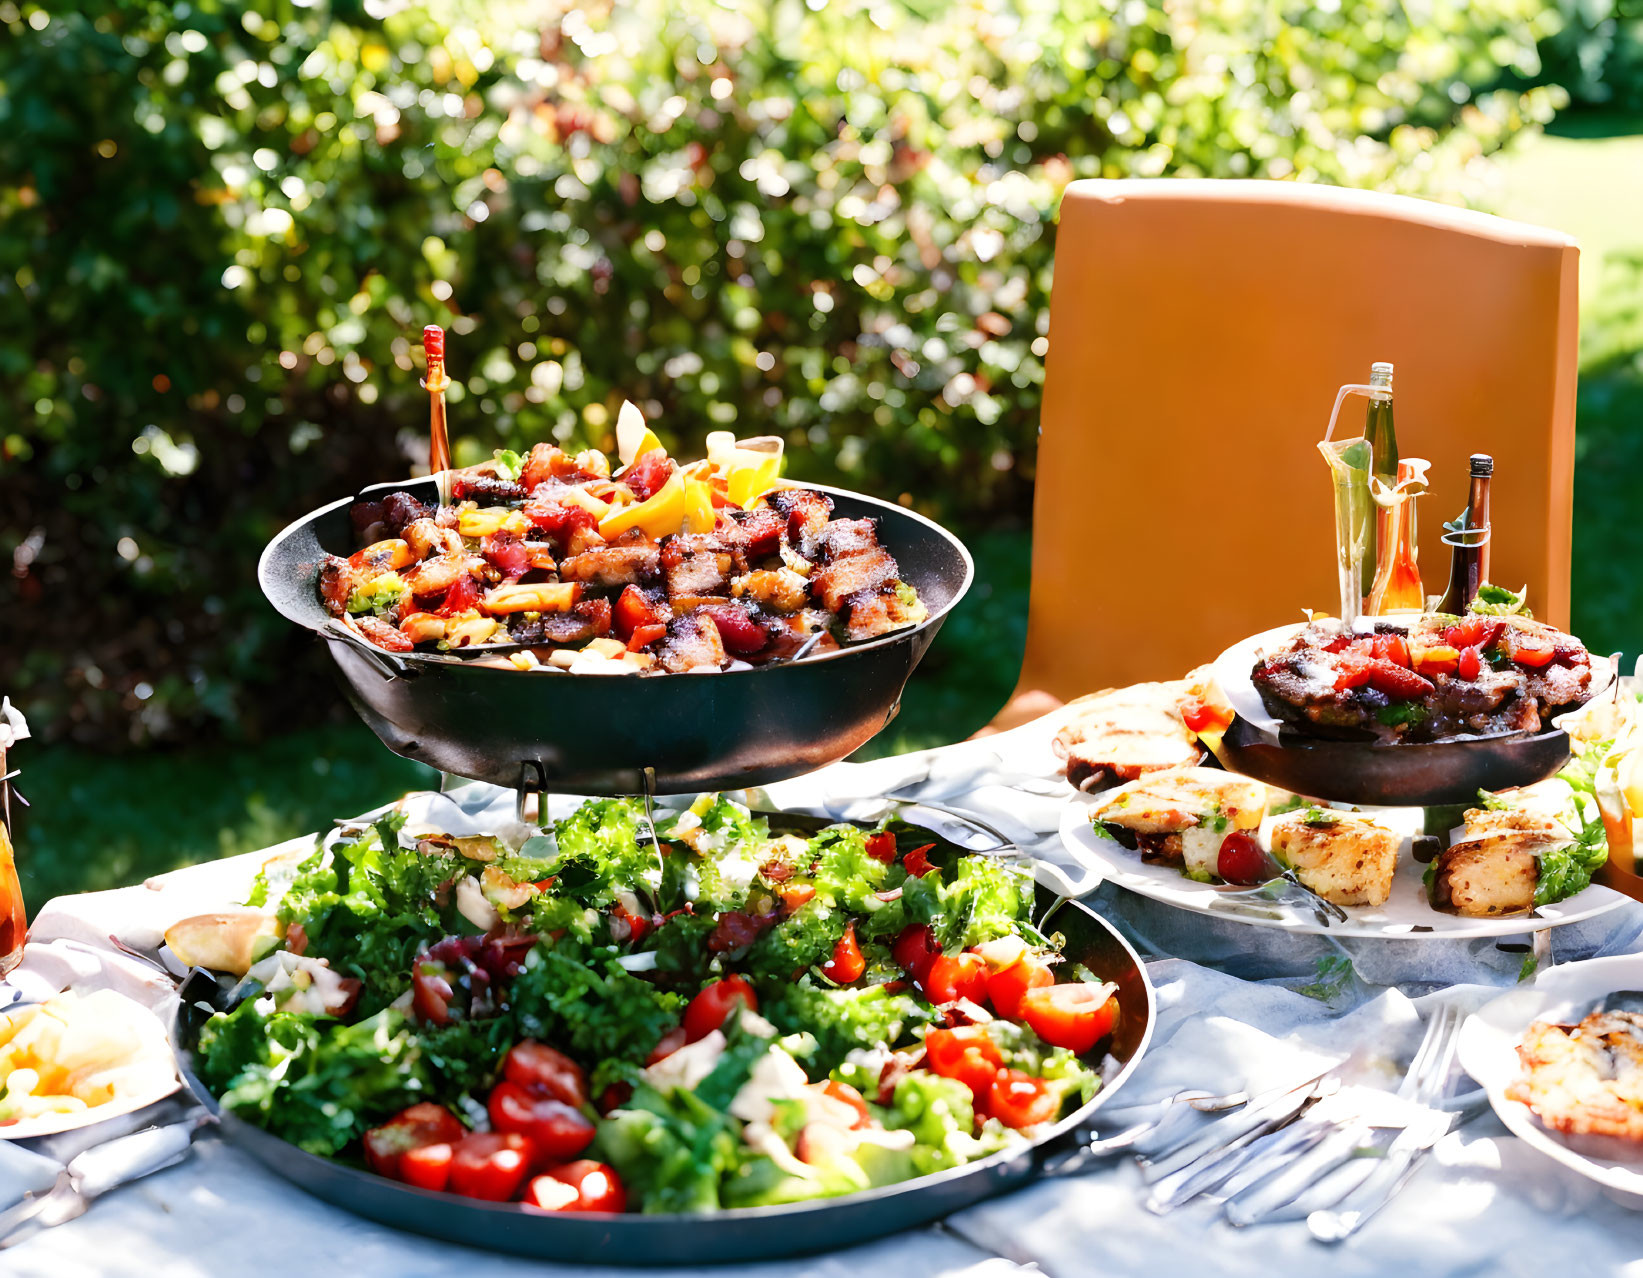 Alfresco dining scene with fresh salads and grilled dishes on display